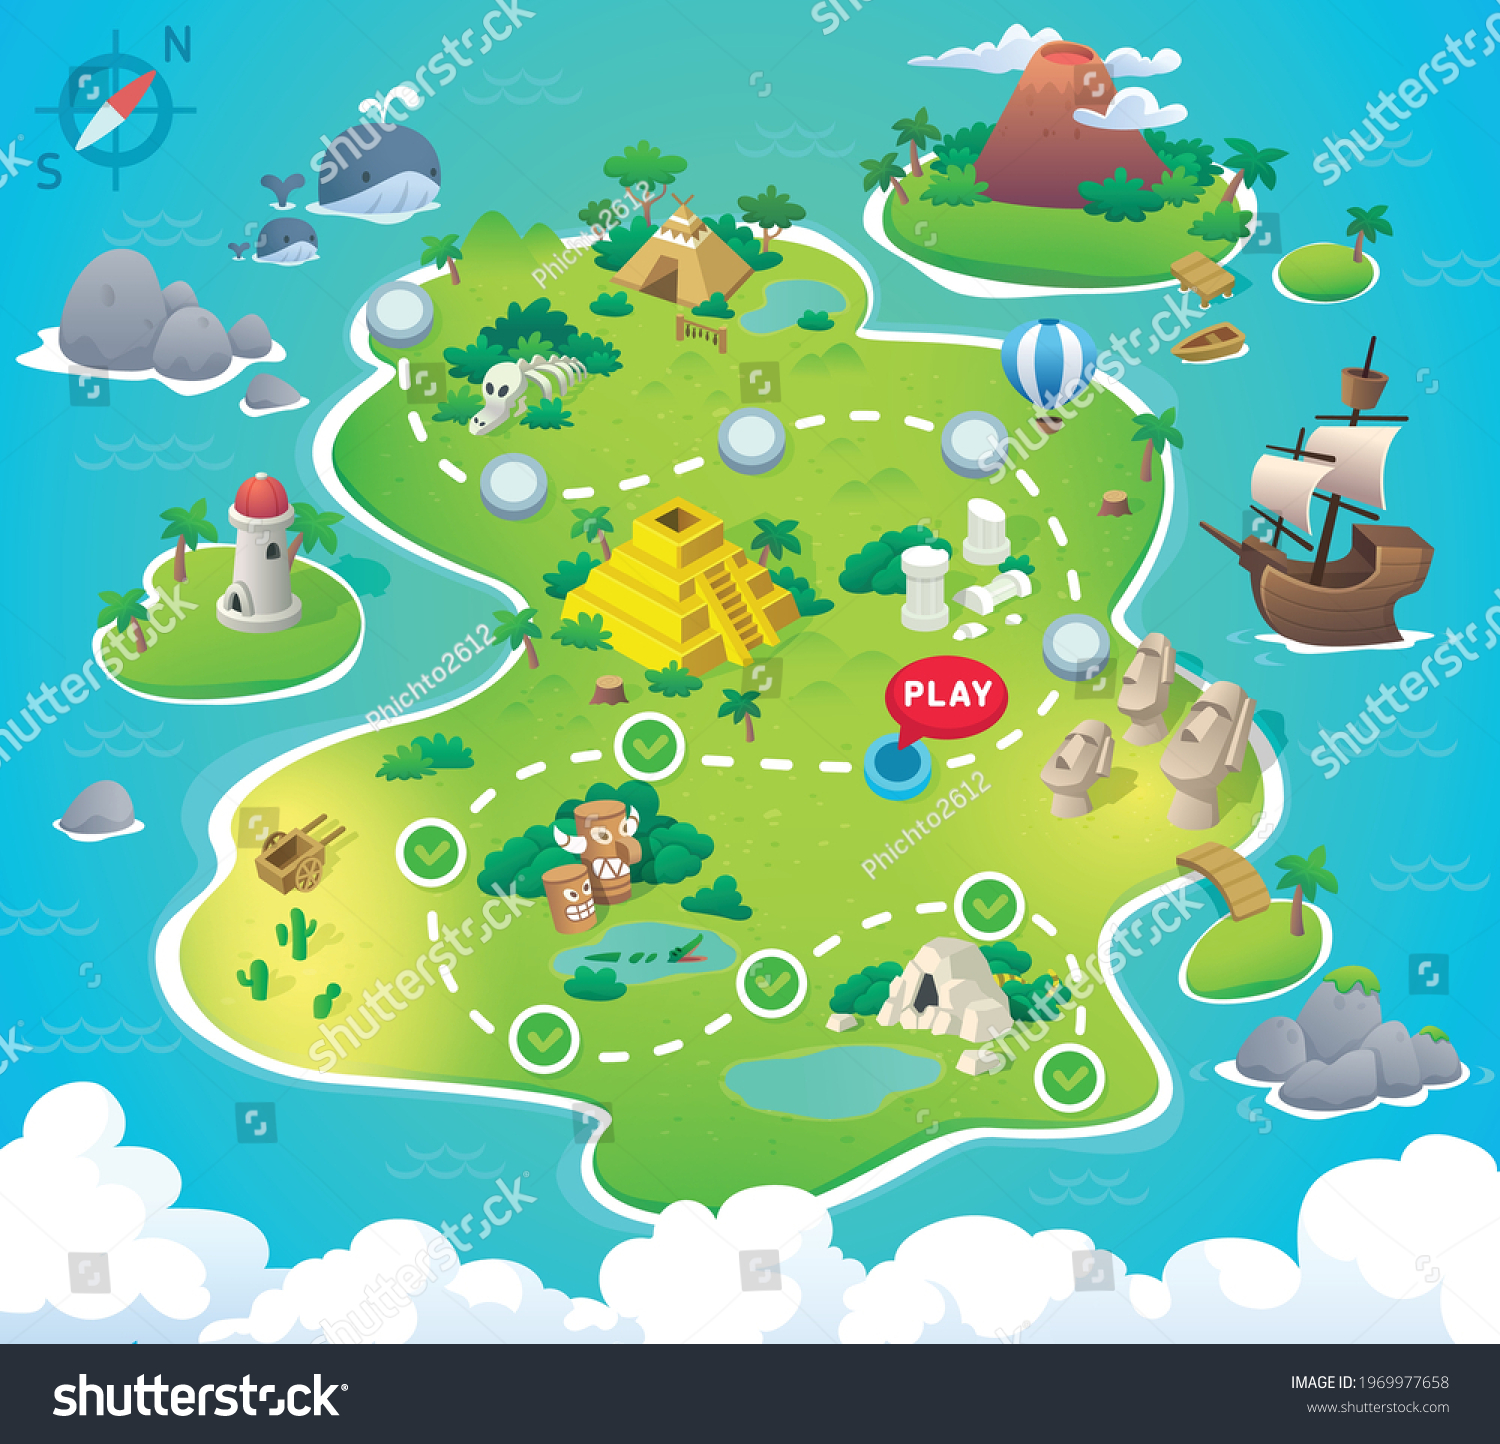 Game Map. Pirate Treasure Maps for children. island. Vector background for game interface. Uninhabited island #1969977658